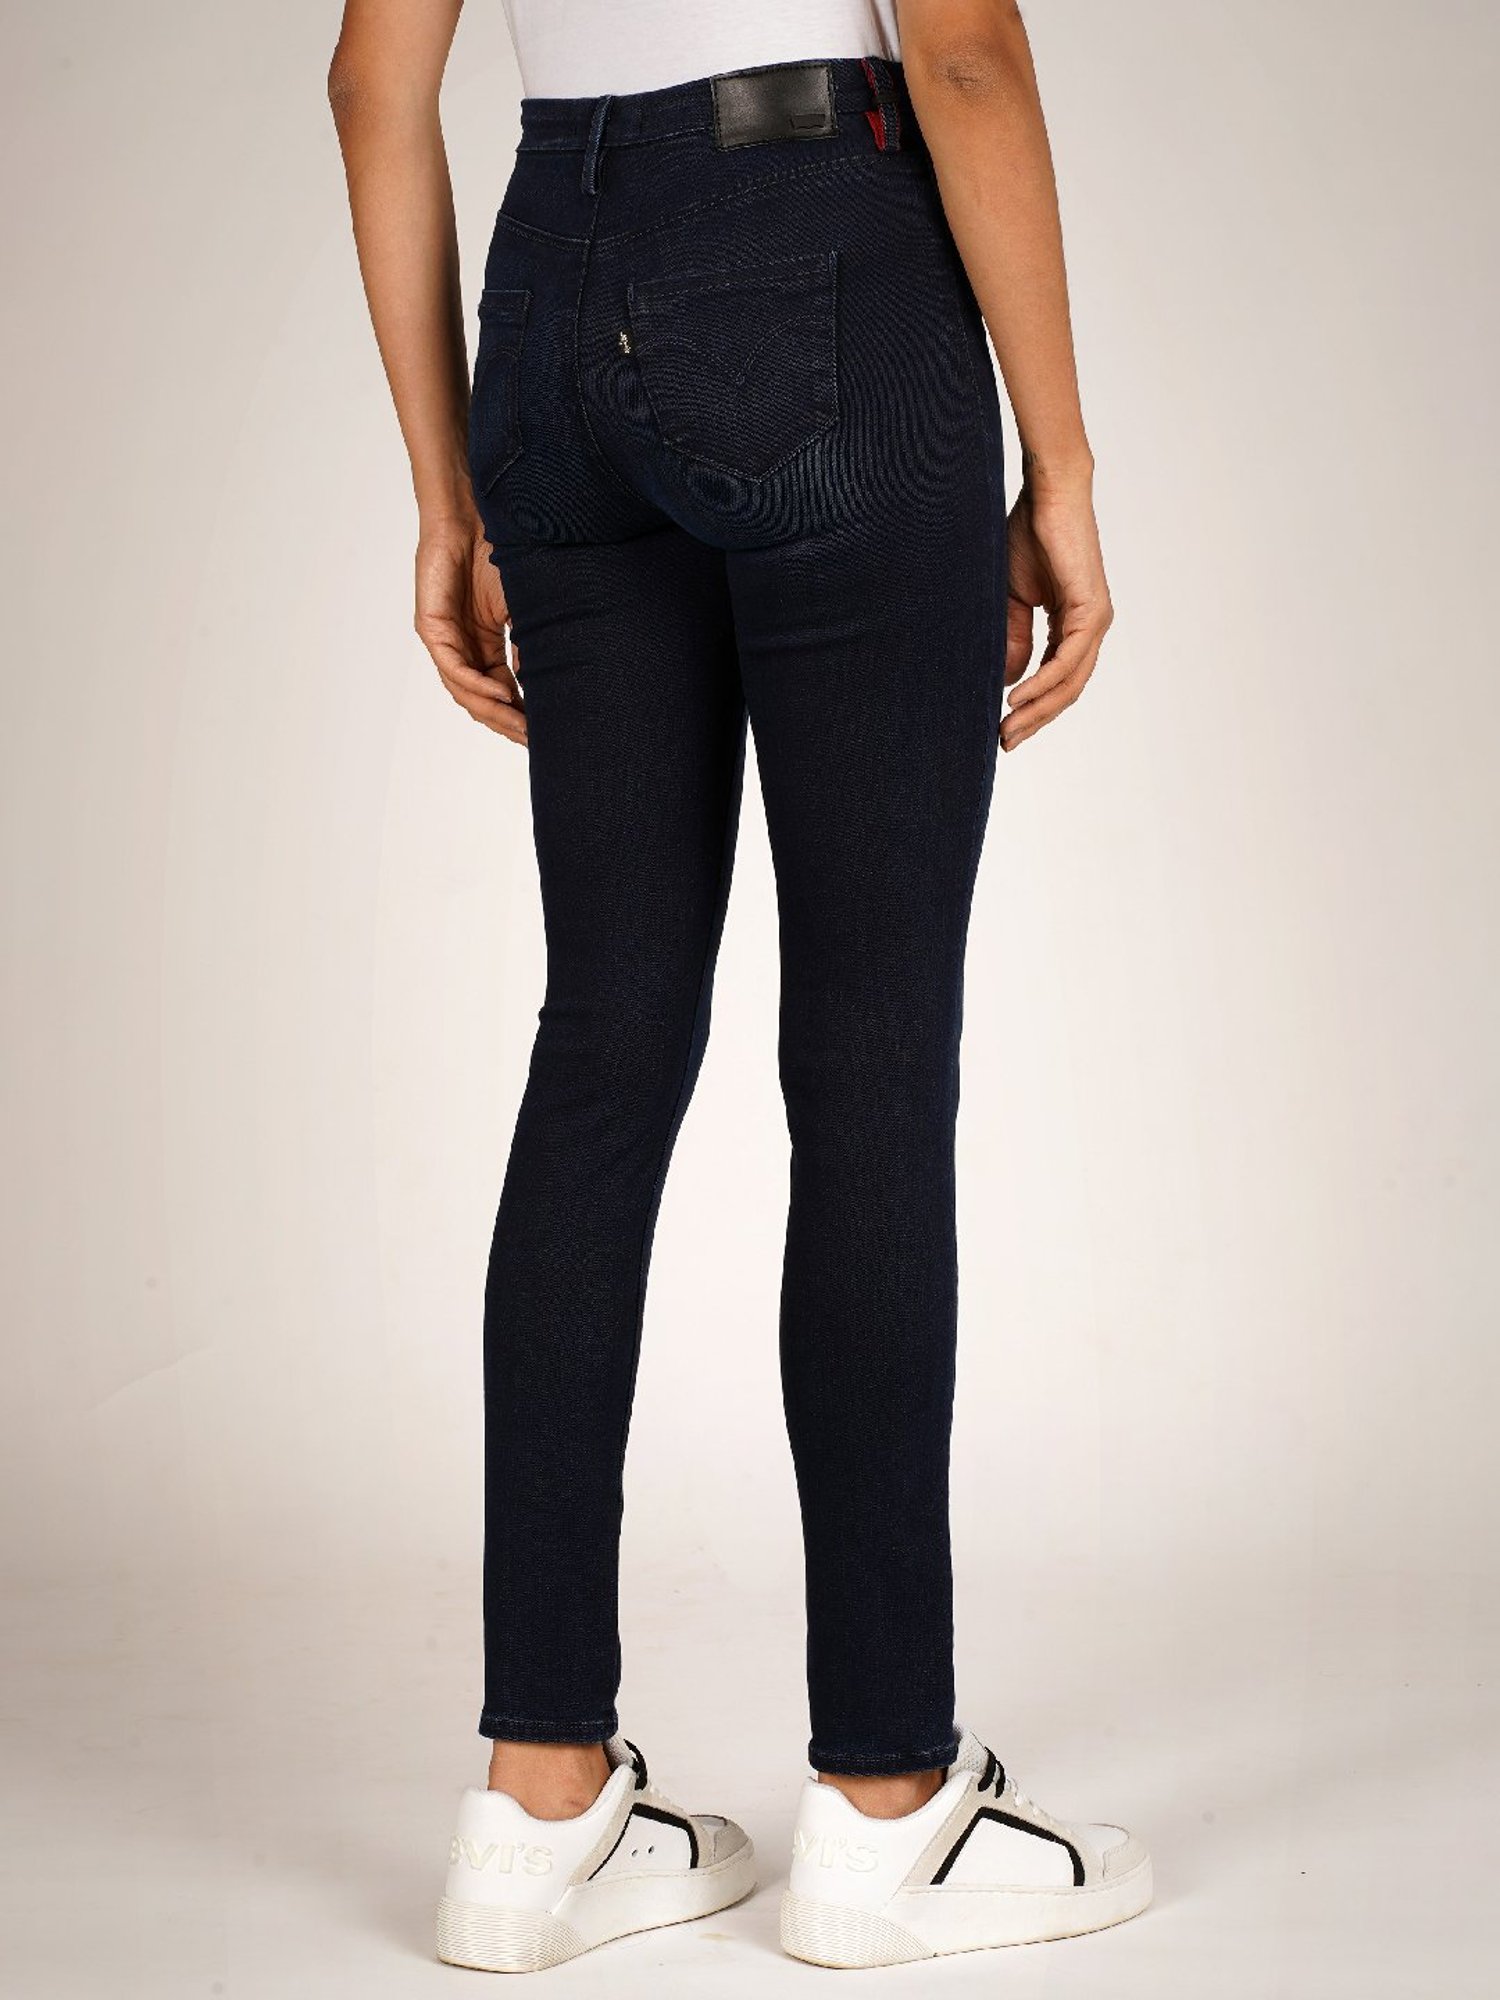 Angelfab Dark Blue Cotton Skinny Fit High Rise Jeans